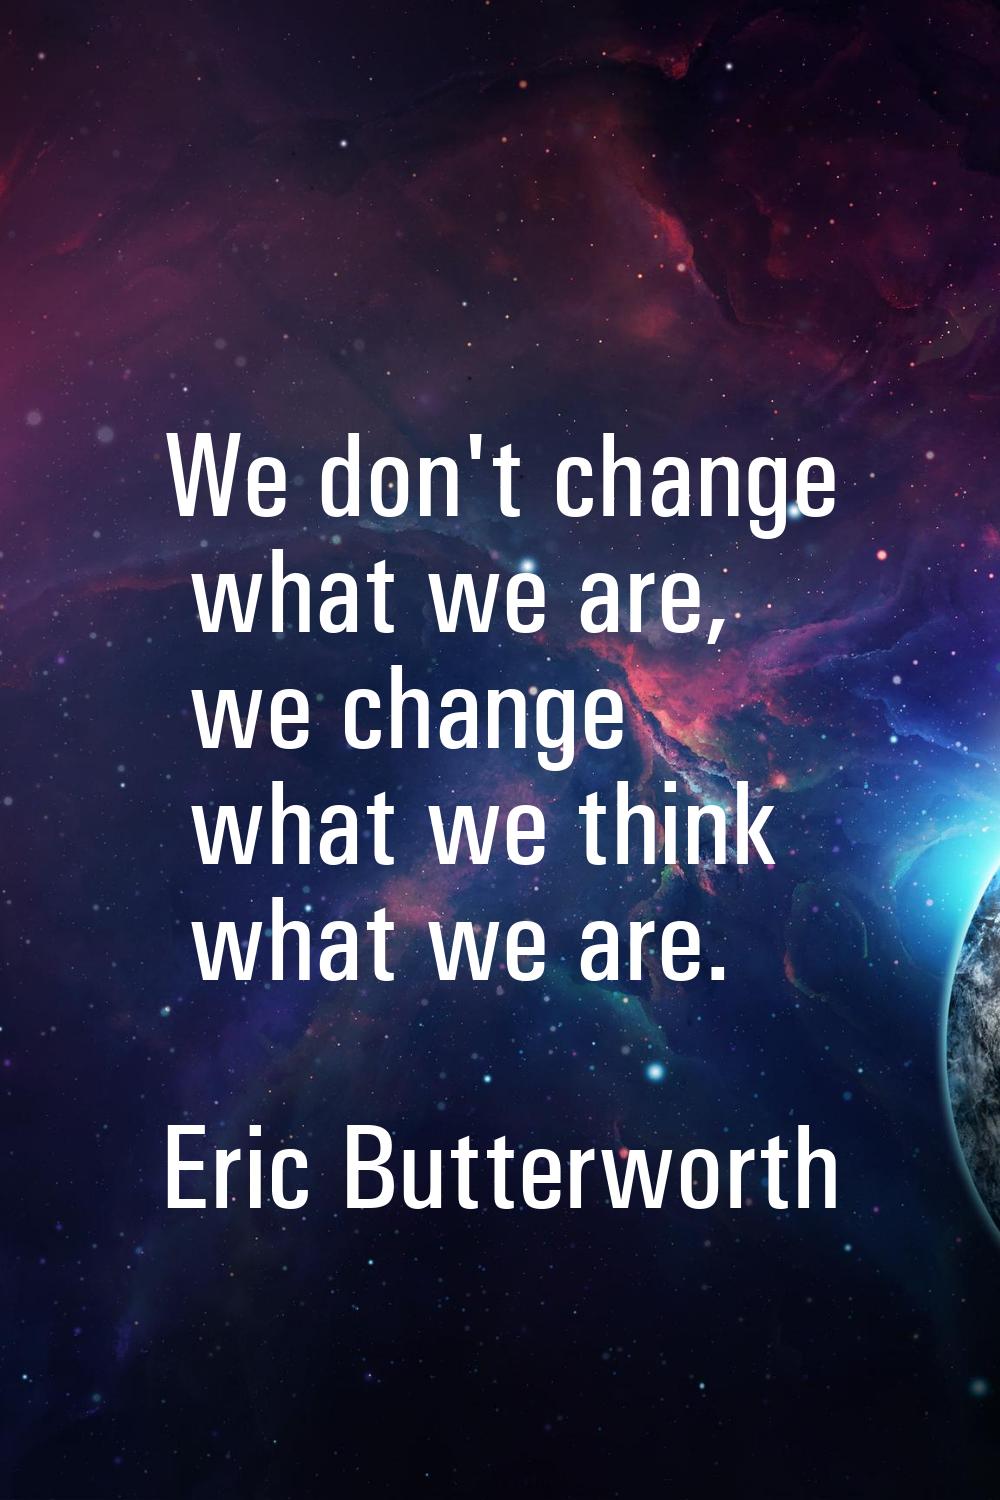 We don't change what we are, we change what we think what we are.